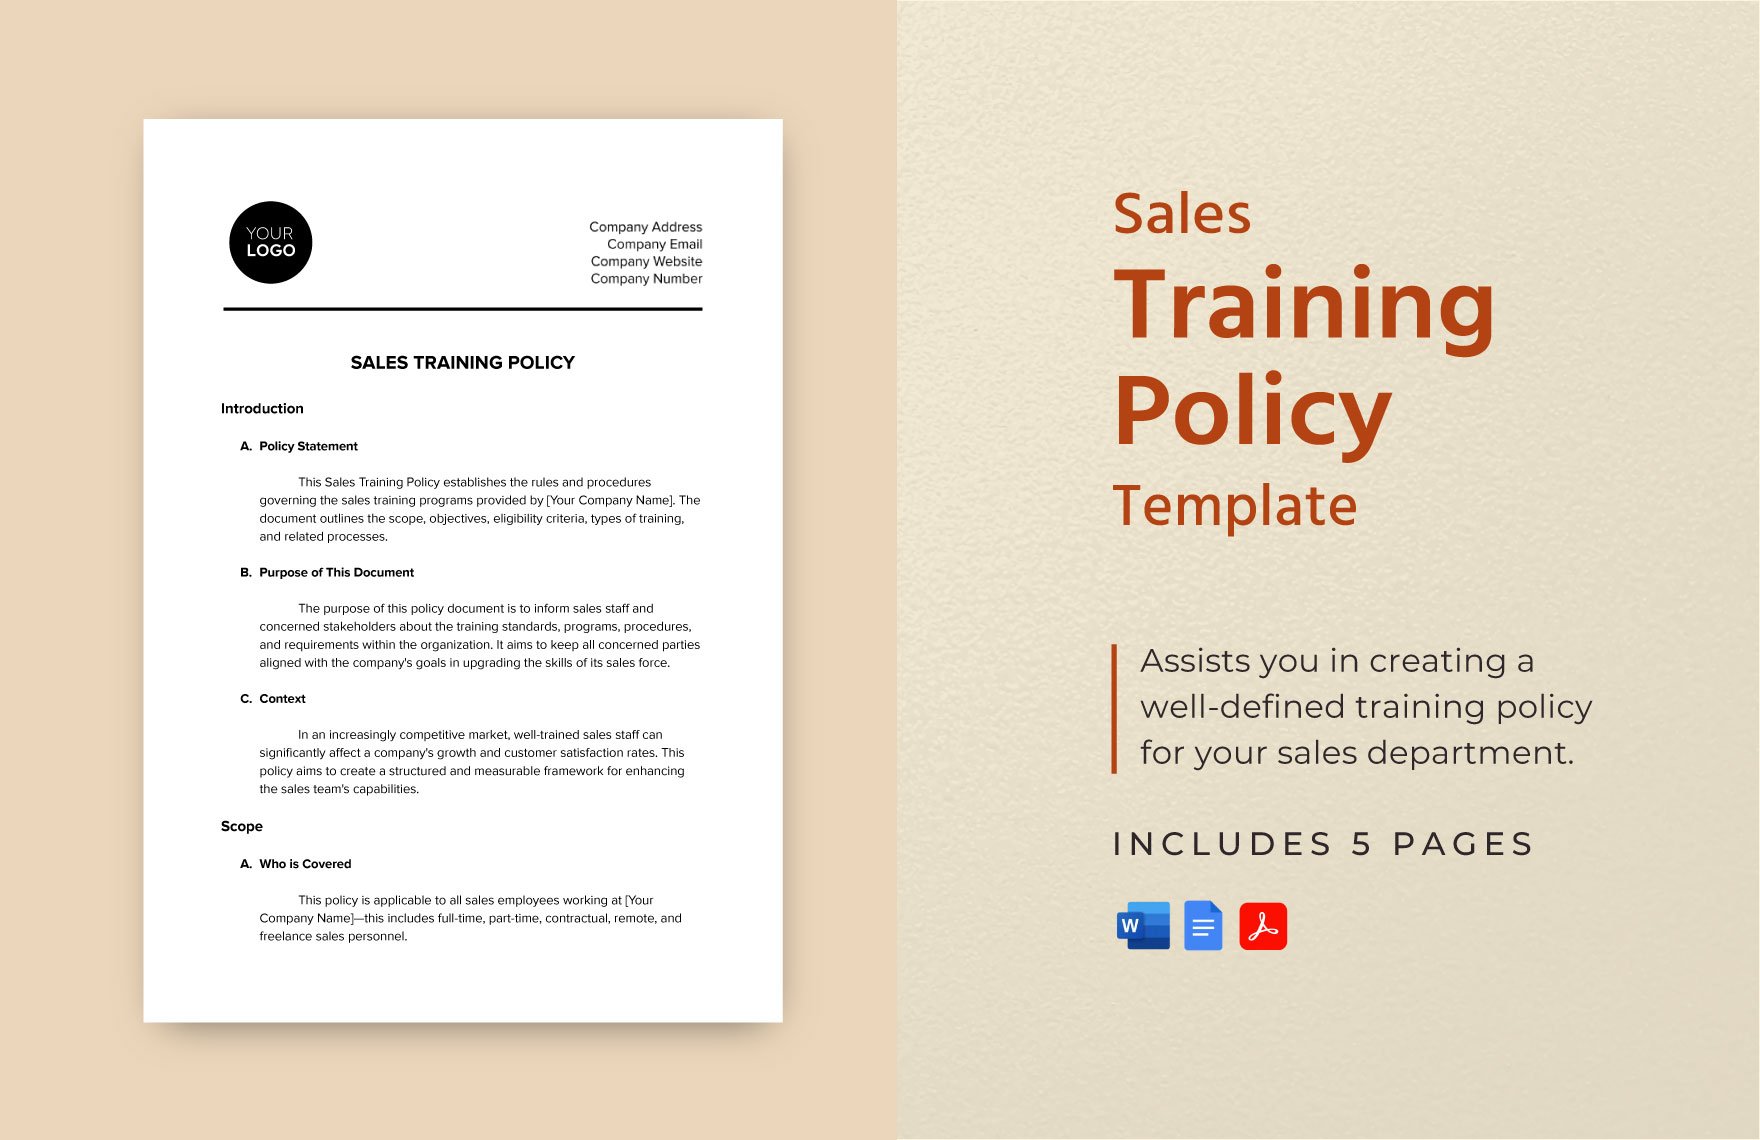 Sales Training Policy Template in Word, Google Docs, PDF